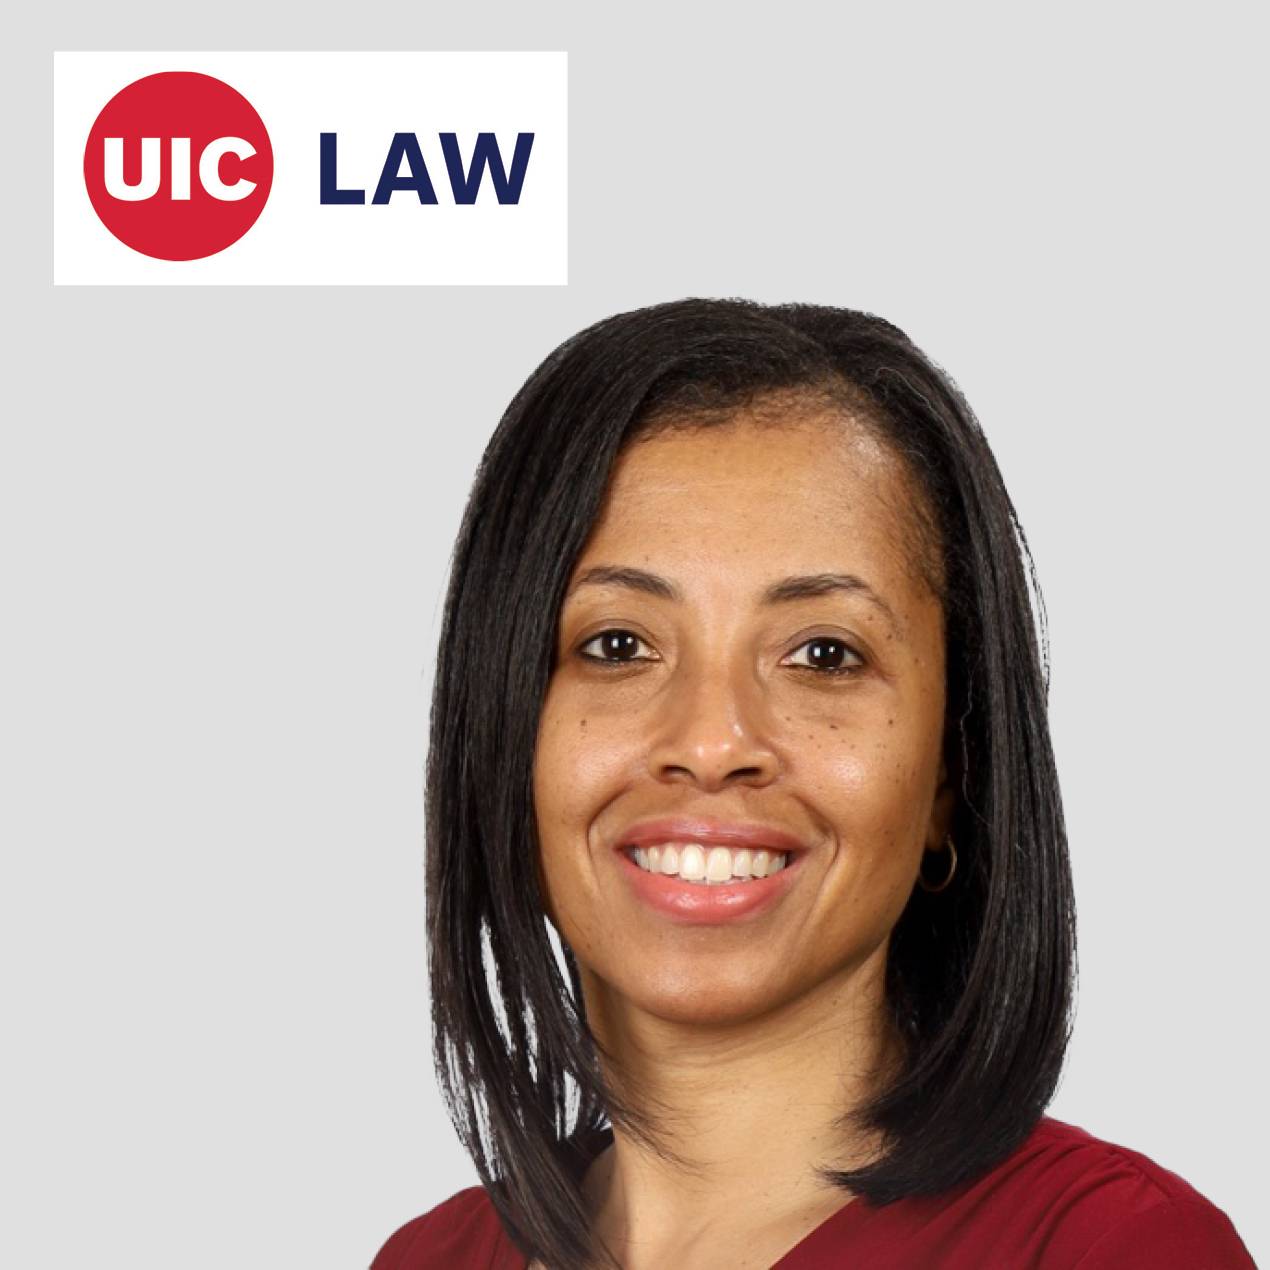 UIC Law Welcomes Yolanda King to Faculty